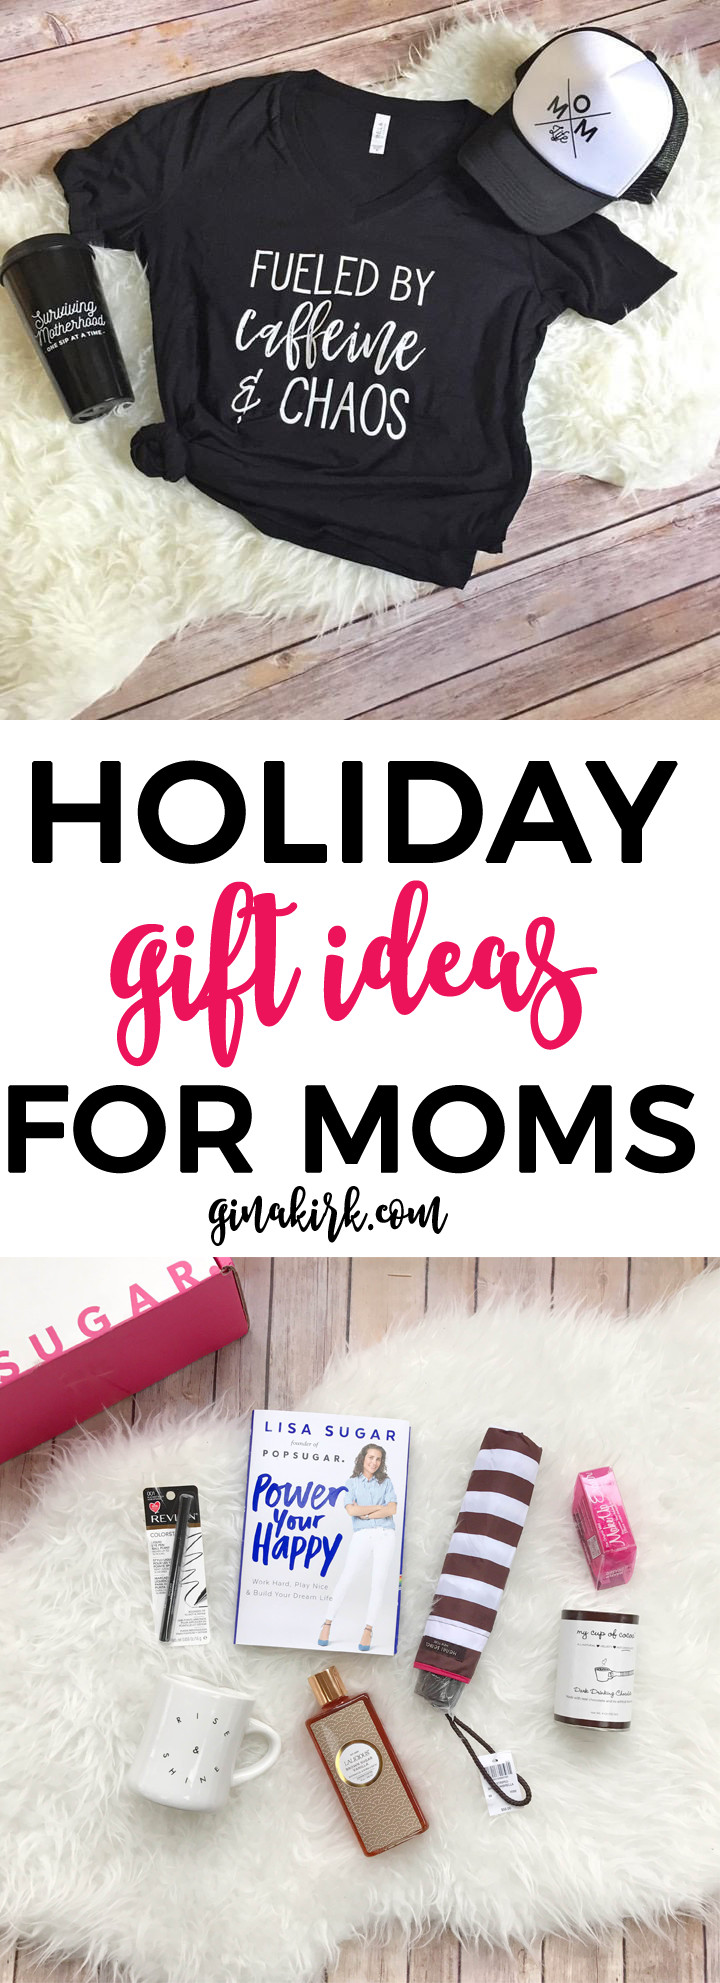 New Mum Christmas Gift Ideas
 Holiday Gift Ideas for Moms